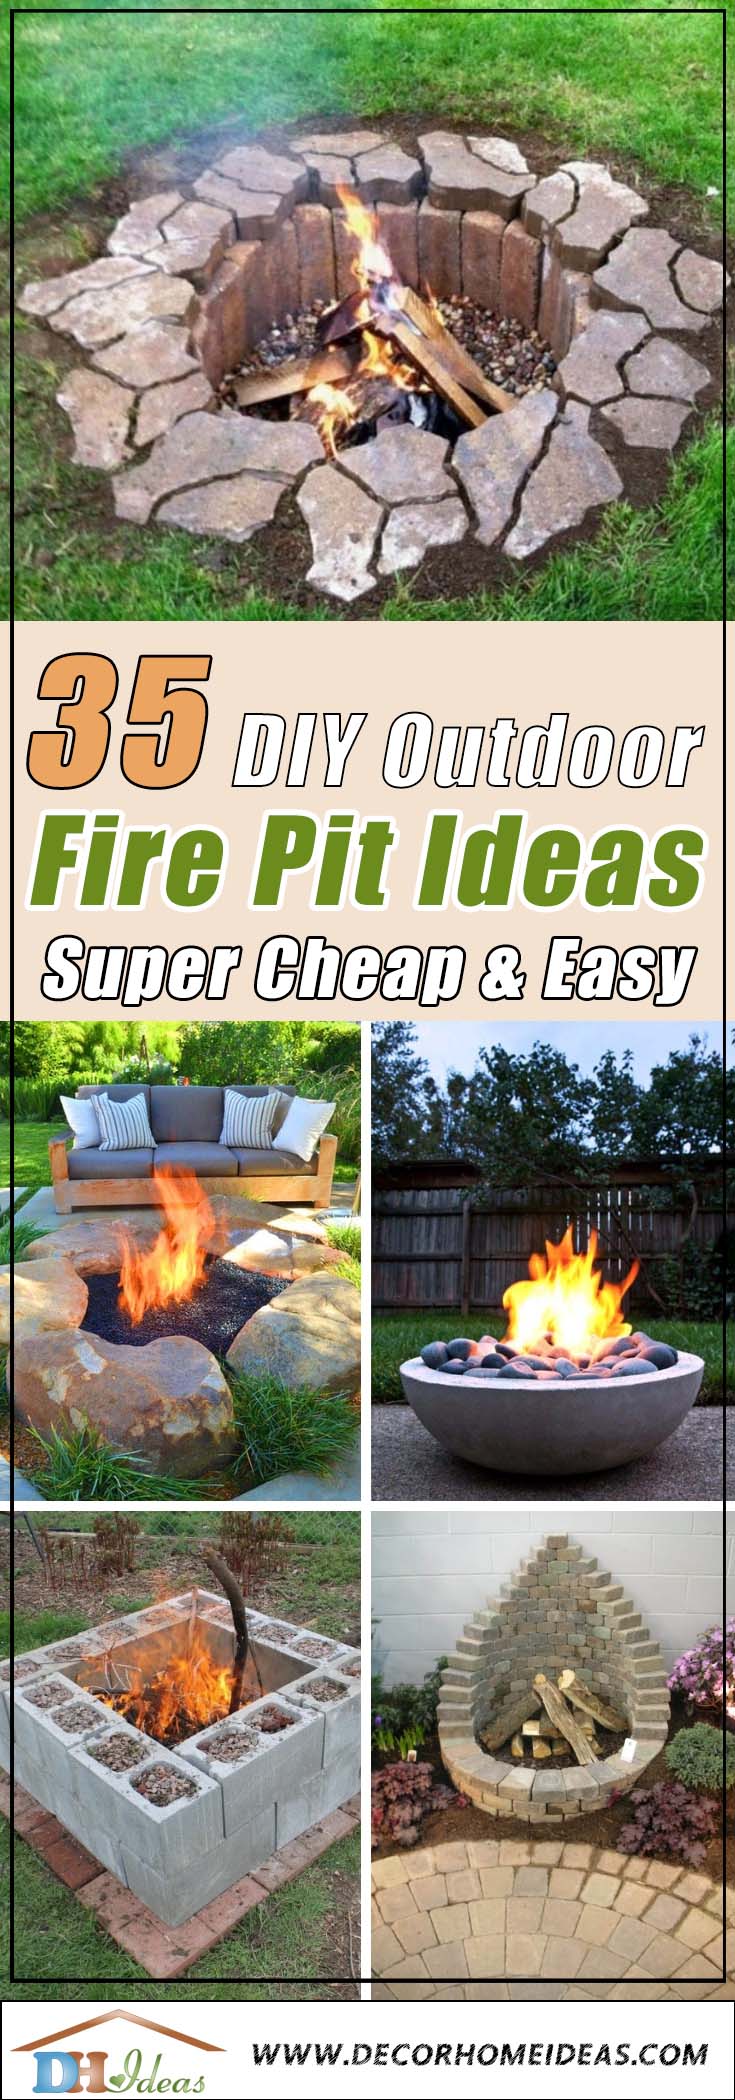 35 Easy To Do Fire Pit Ideas And, How To Build An Easy Backyard Fire Pit